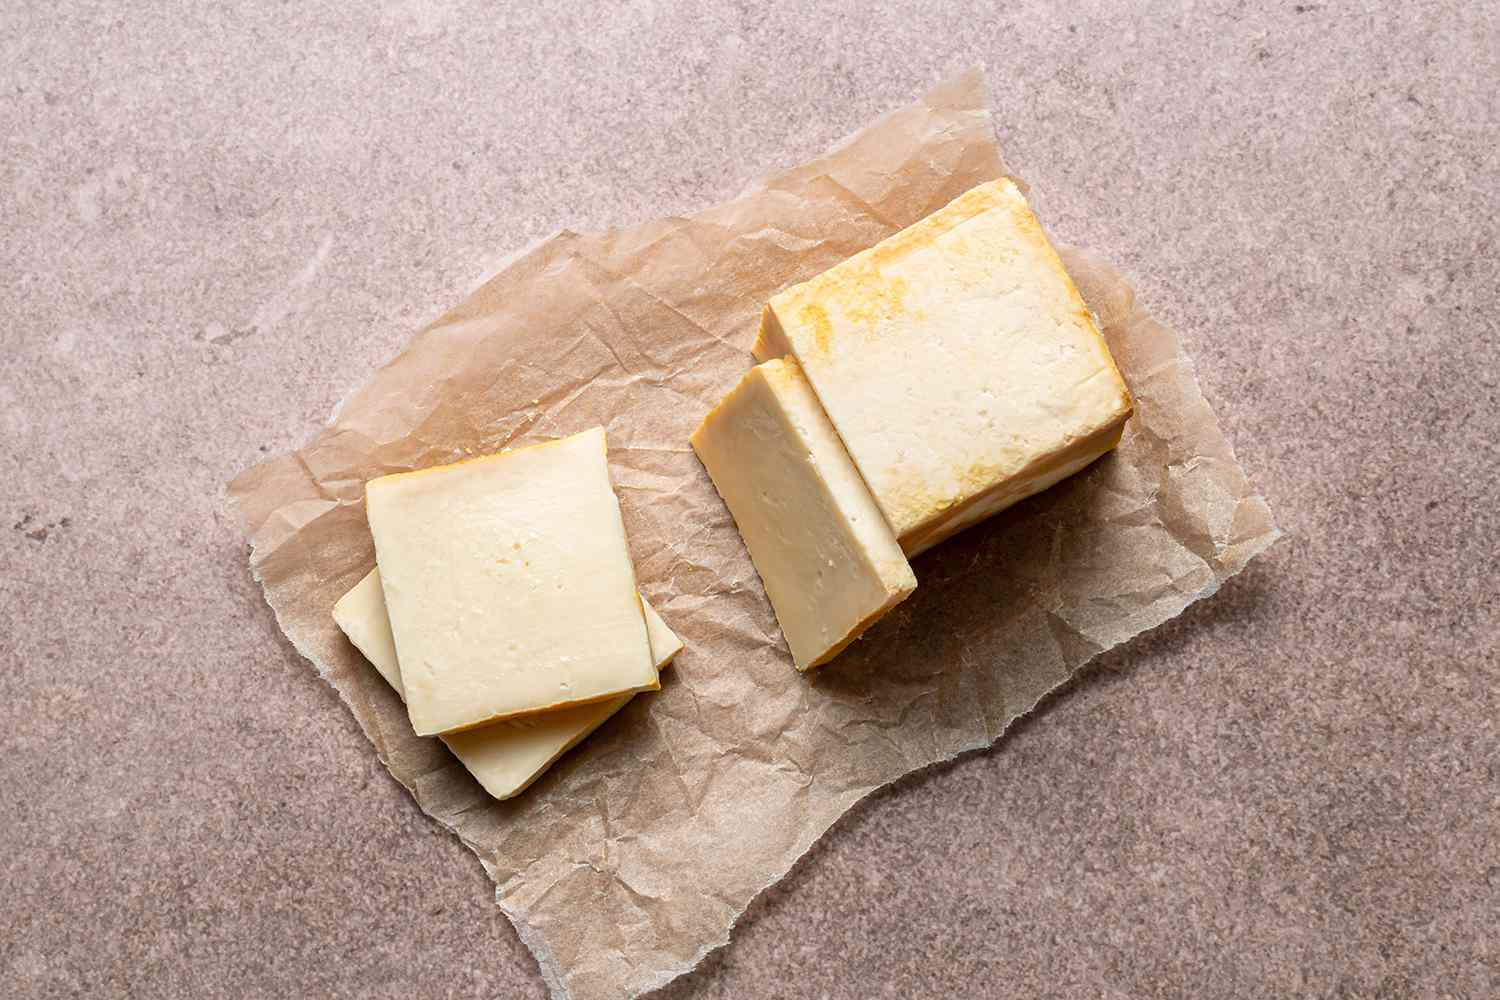 how-to-eat-limburger-cheese-without-crackers